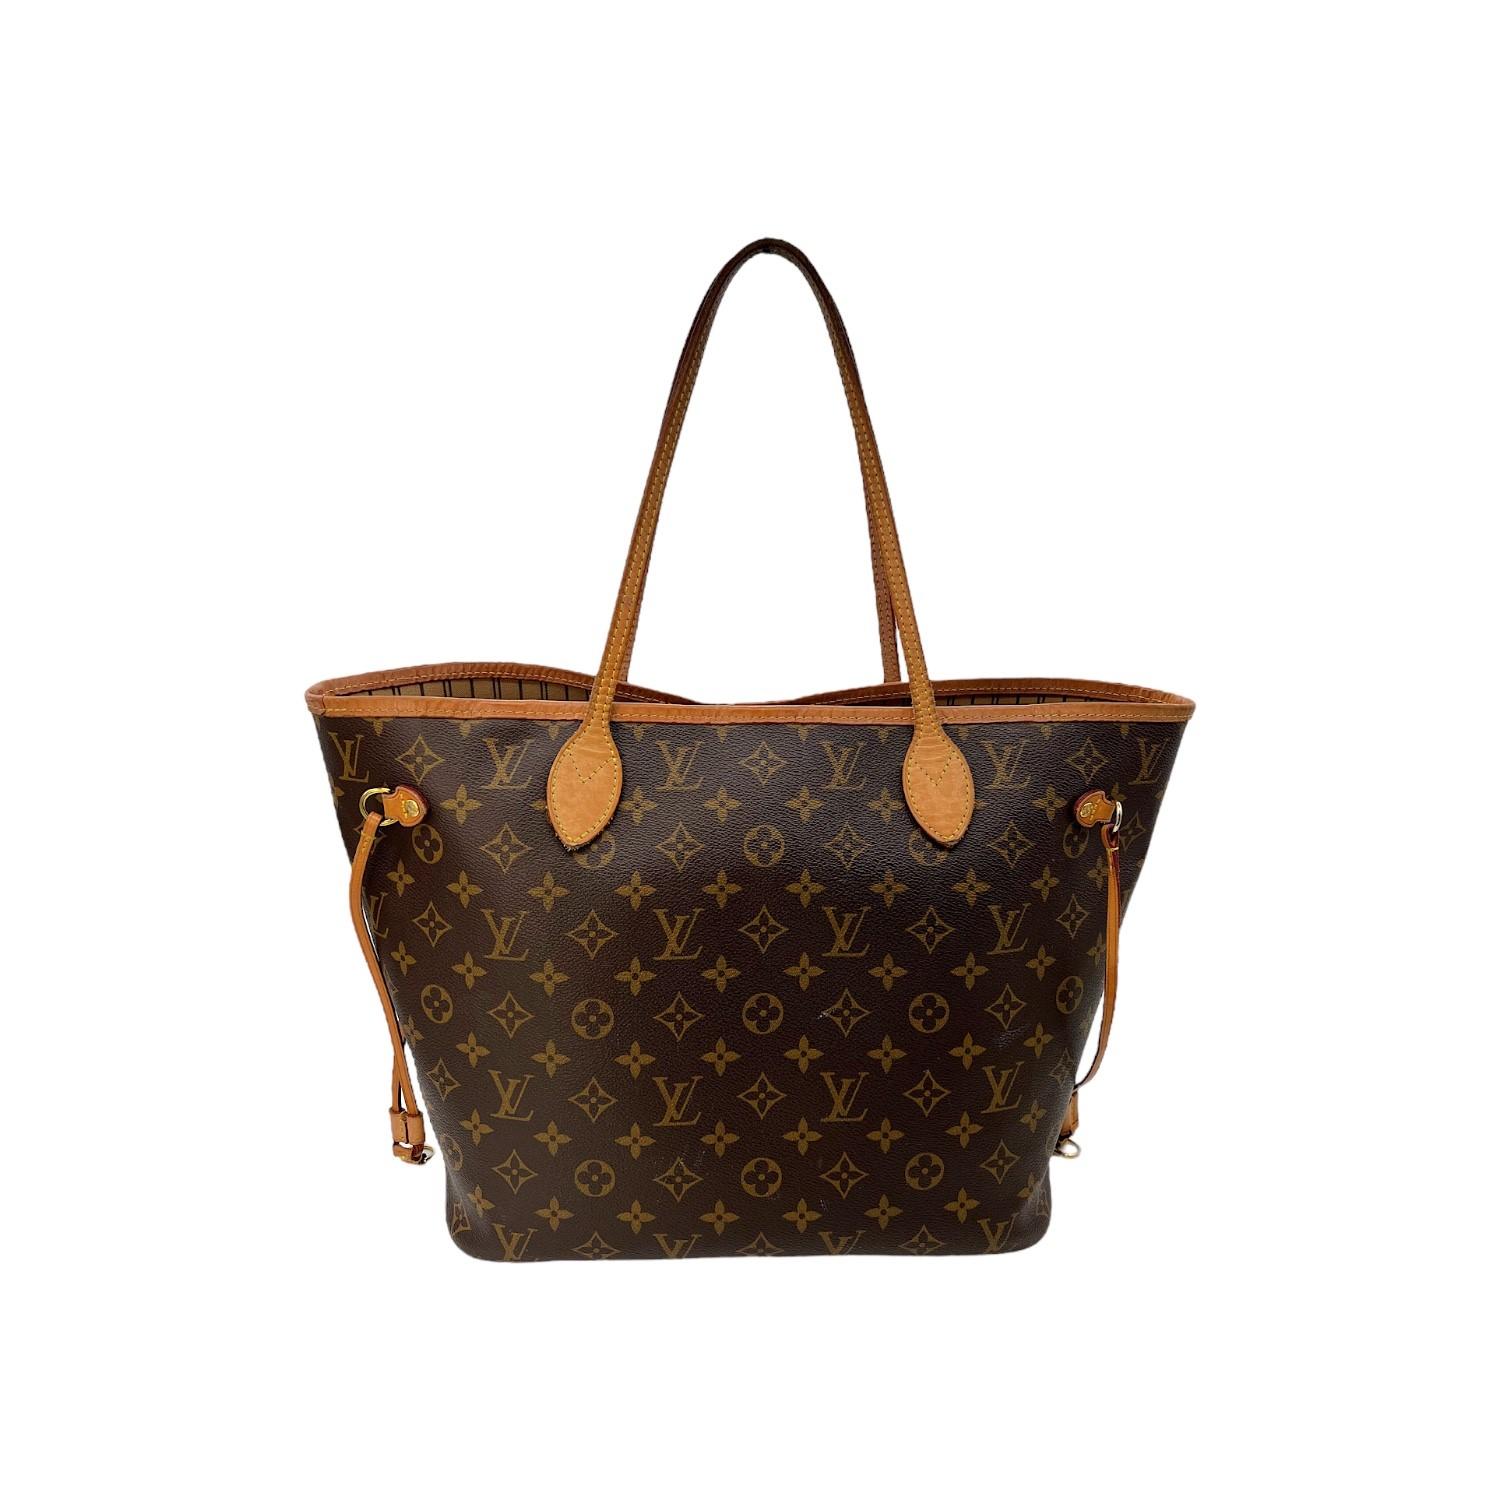 This Louis Vuitton Neverfull MM handbag was made in 2020 in France and it is crafted of the brown Louis Vuitton Monogram coated canvas with leather trimmings and gold-tone hardware features. It has dual flat leather handles and it has an open top